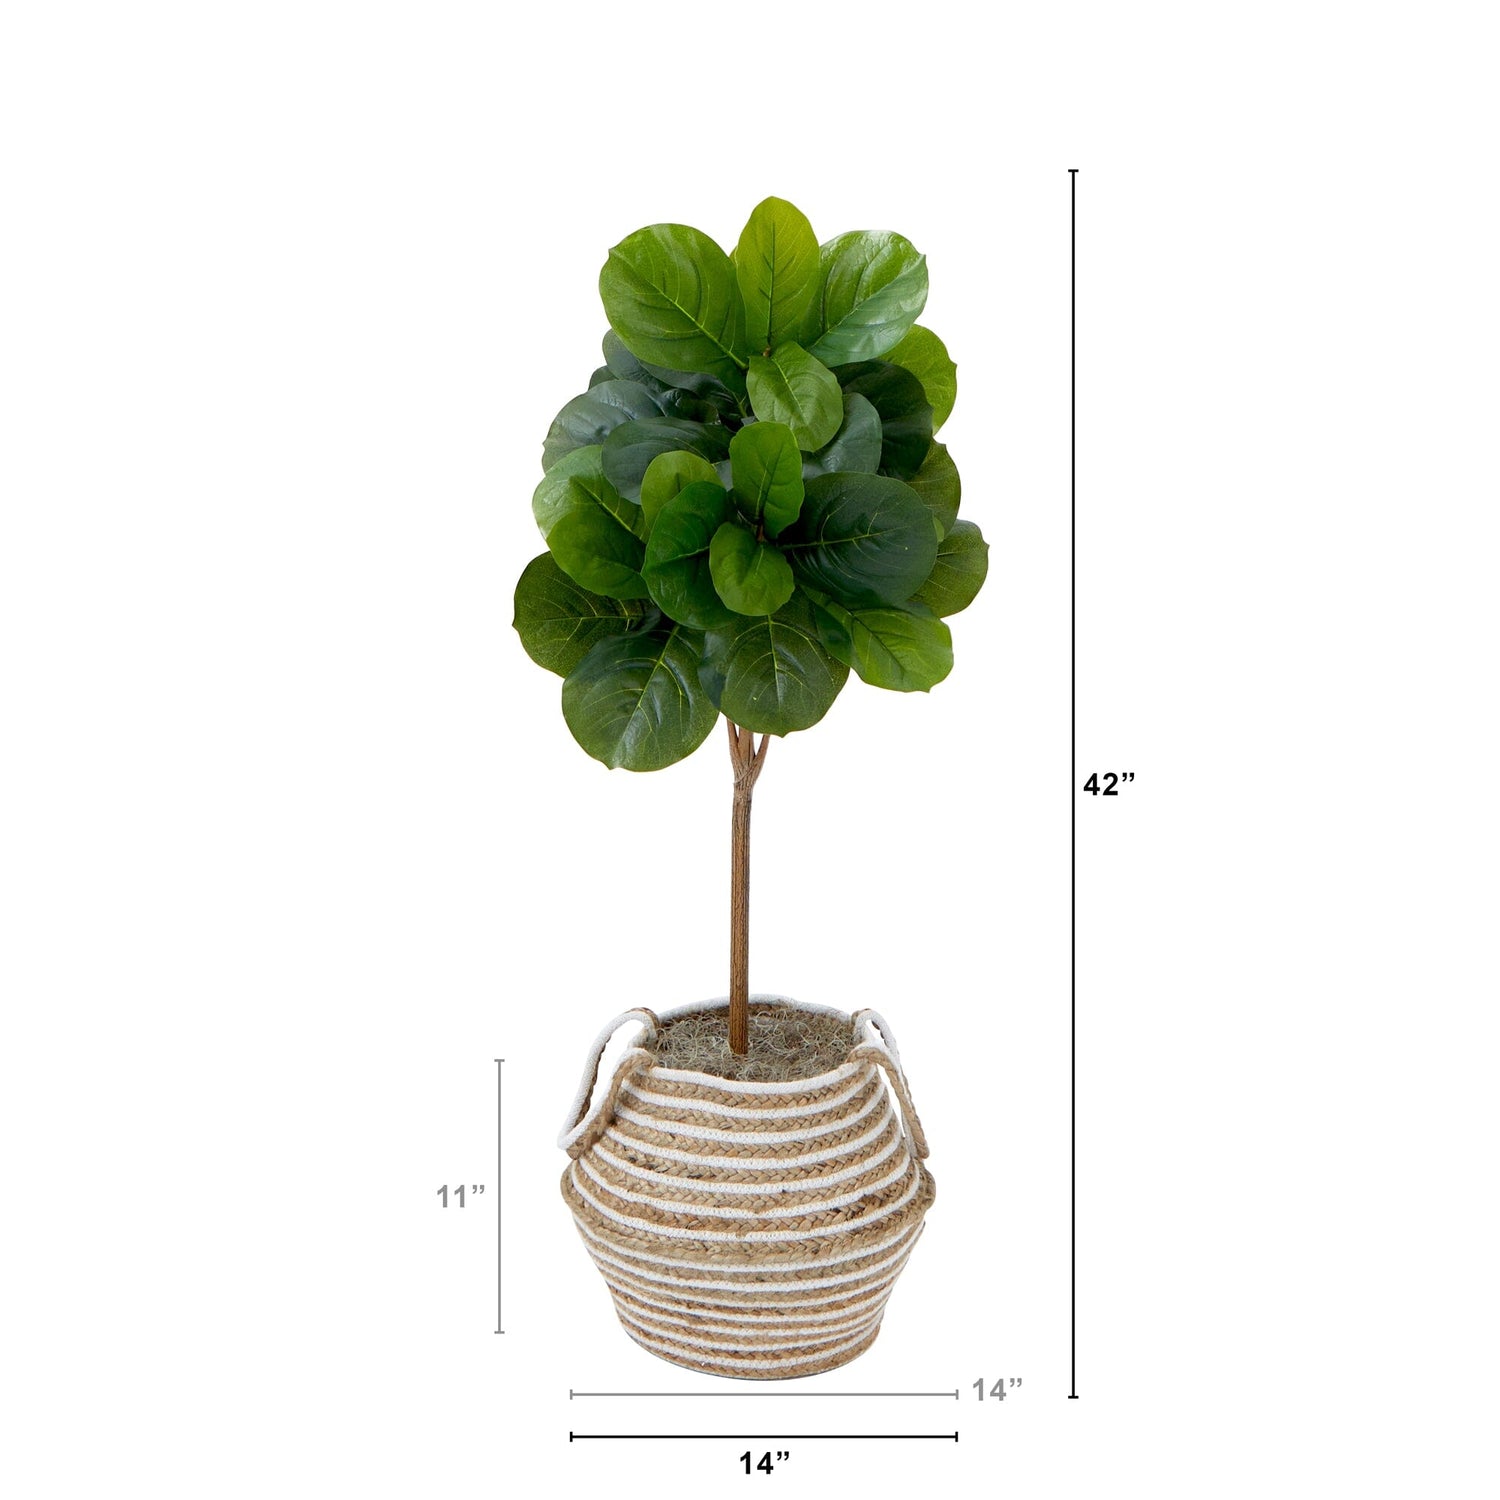 3.5' Artificial Fiddle Leaf Fig Tree with Handmade Cotton & Jute Basket with Tassels DIY KIT